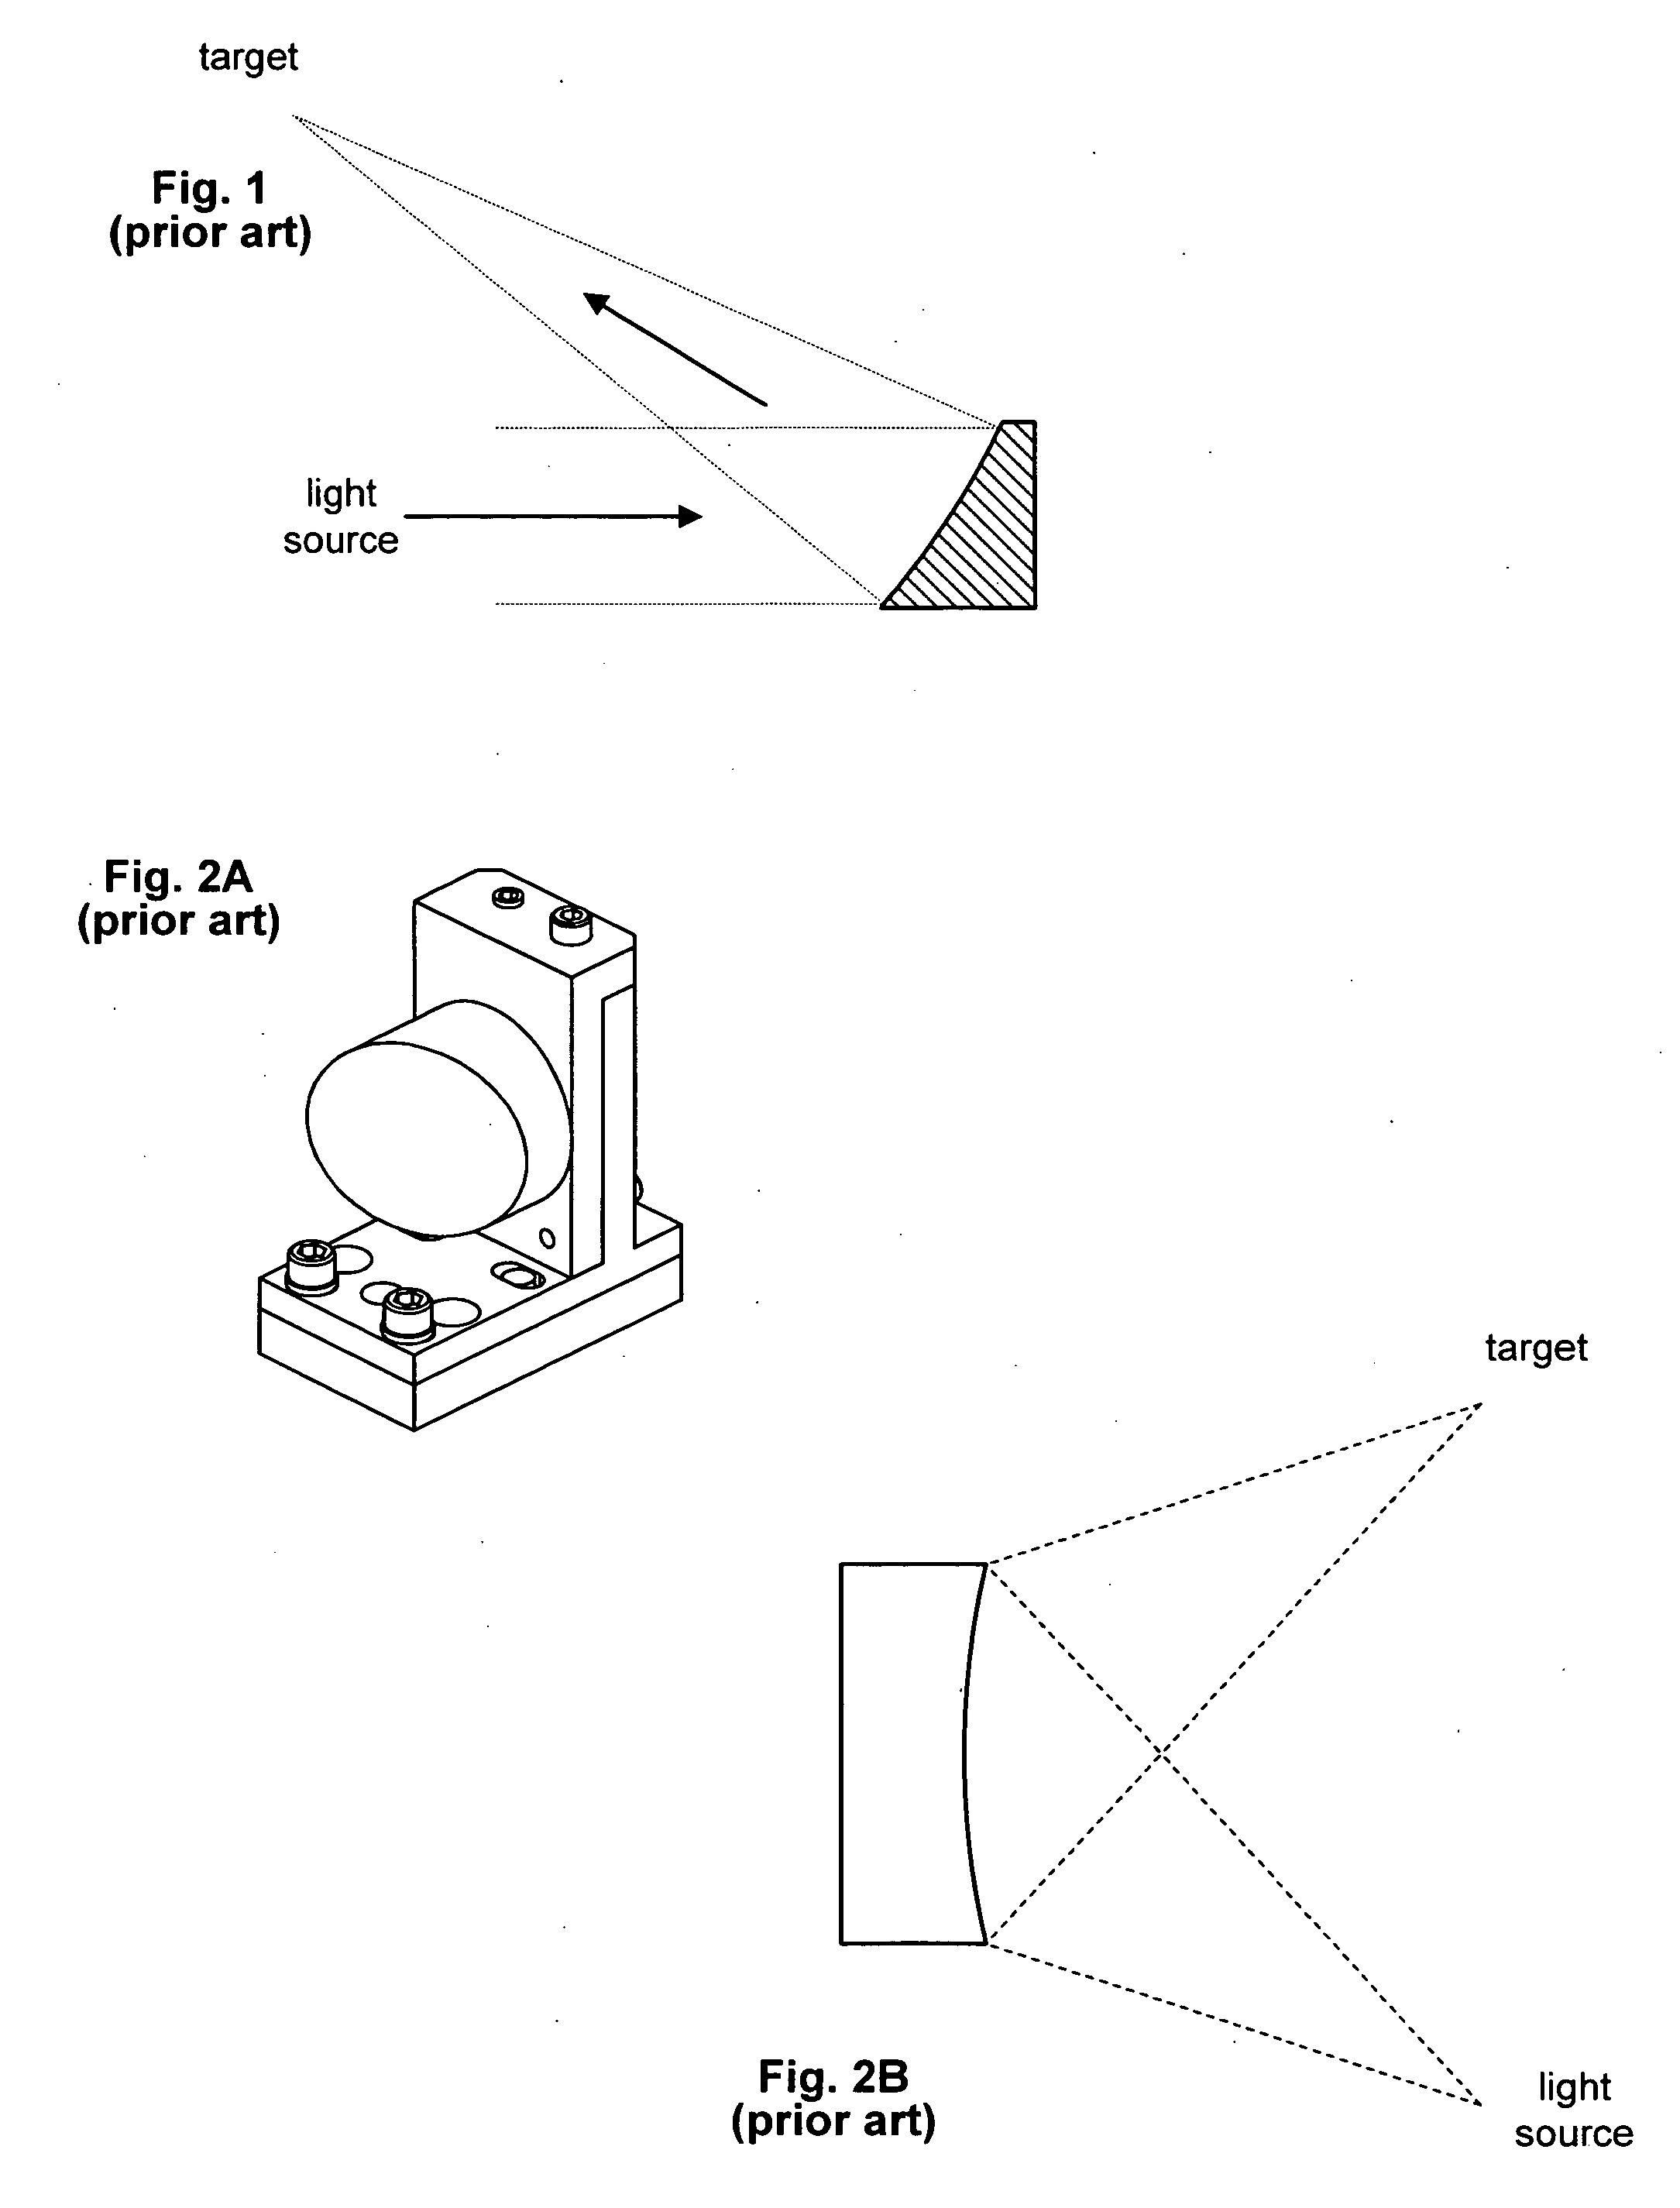 Techniques for reducing optical noise in metrology systems